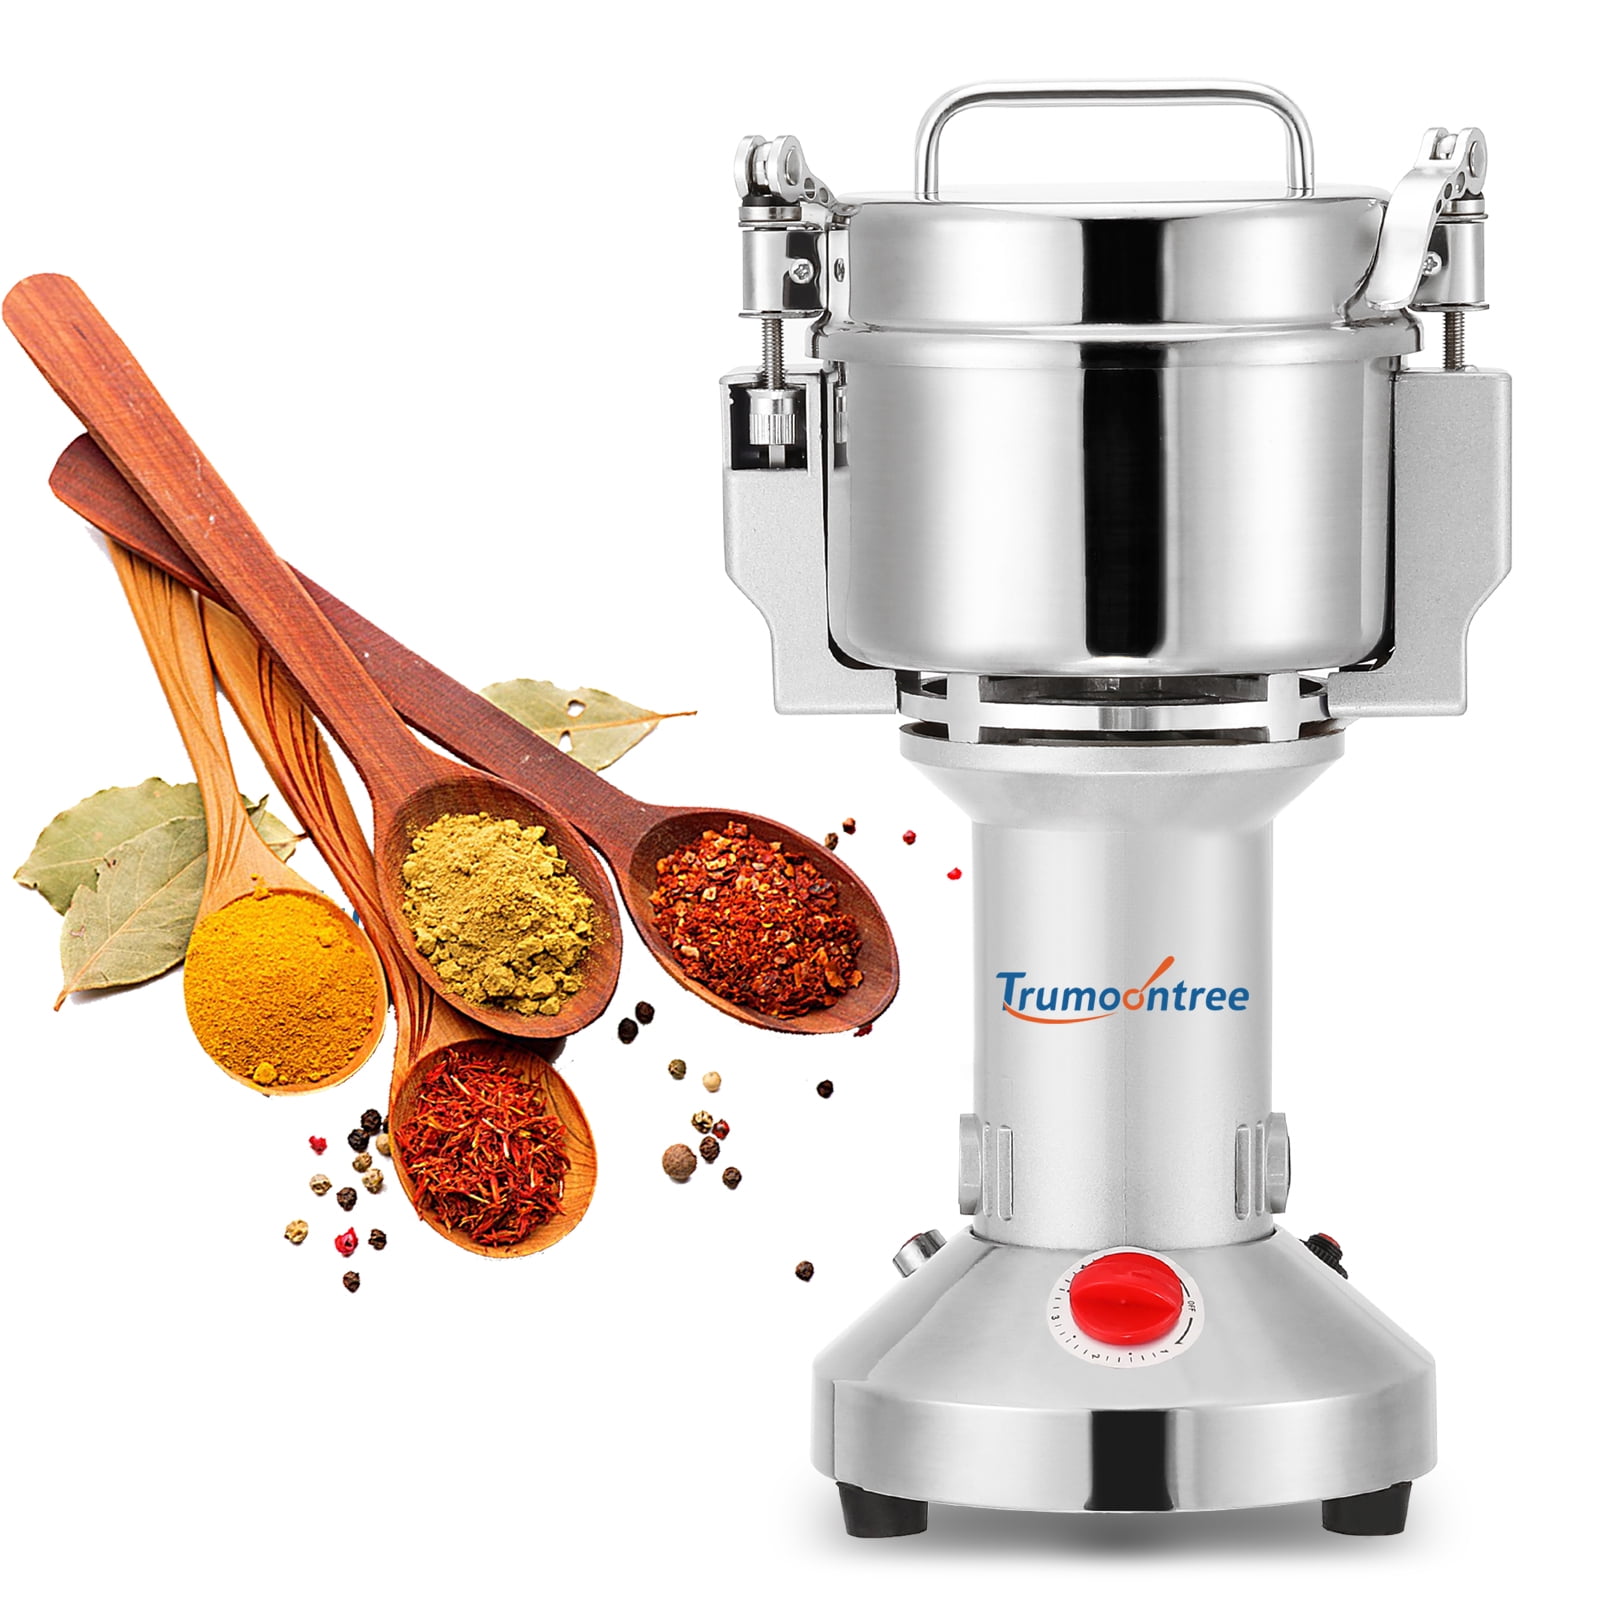 Duronic Electric Spice Grinder Mill CG300, 100g, 300W, Stainless-Steel  Blade, For Beans, Herbs, Spices, Nuts, Seeds, Pulses and Fruit